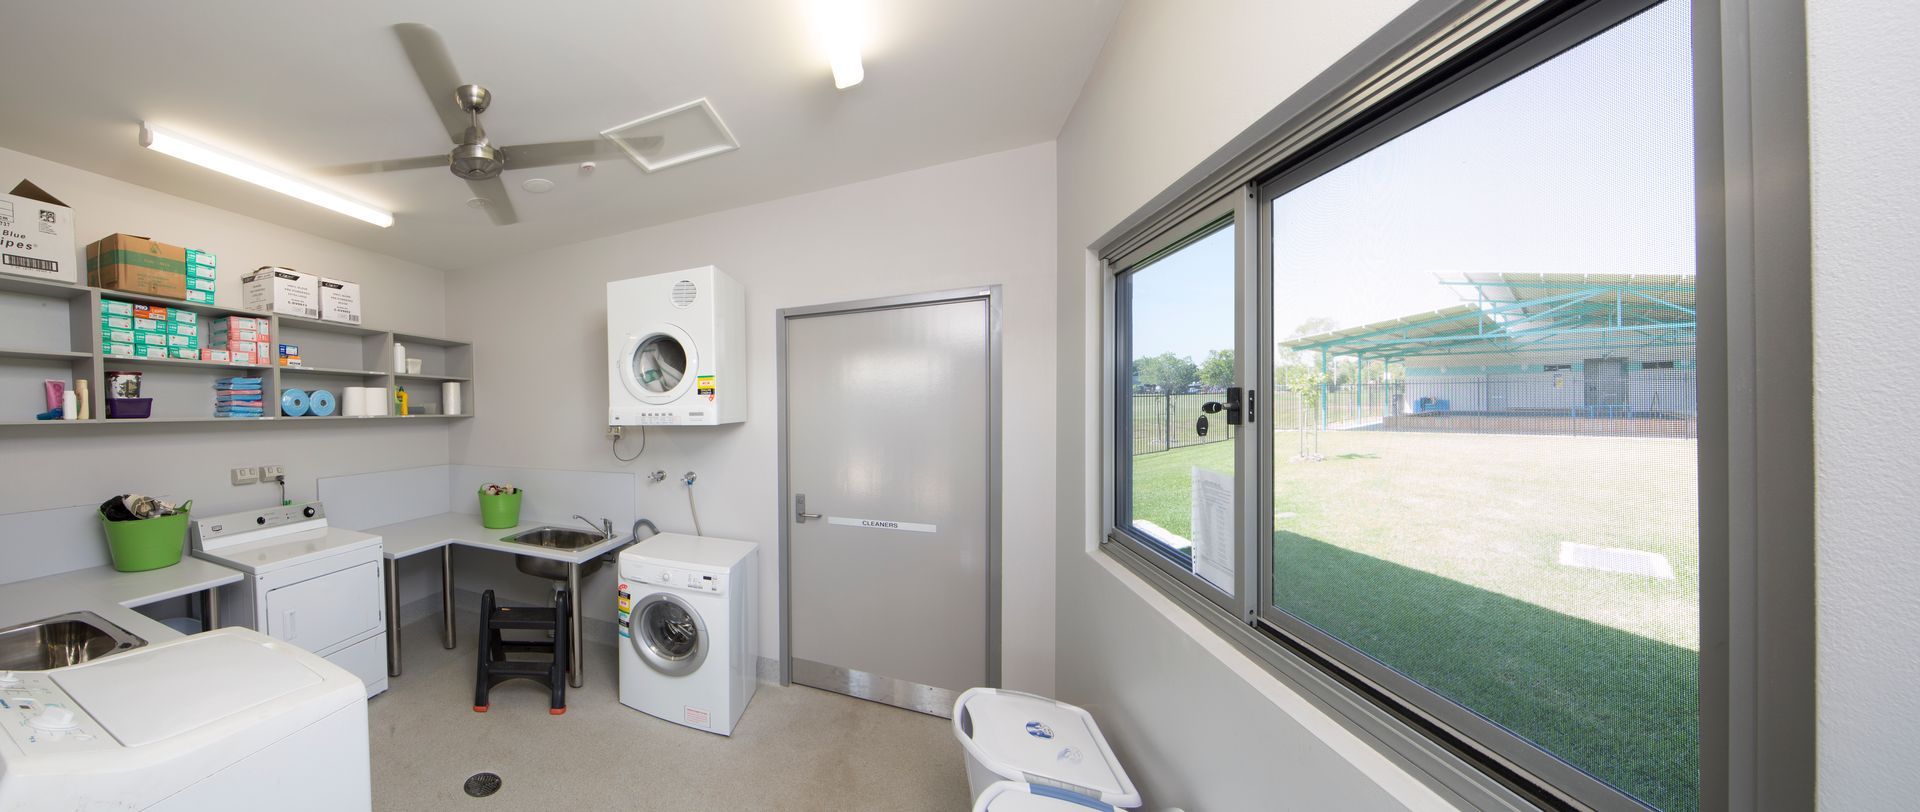 A laundry room with a washer and dryer and a window.